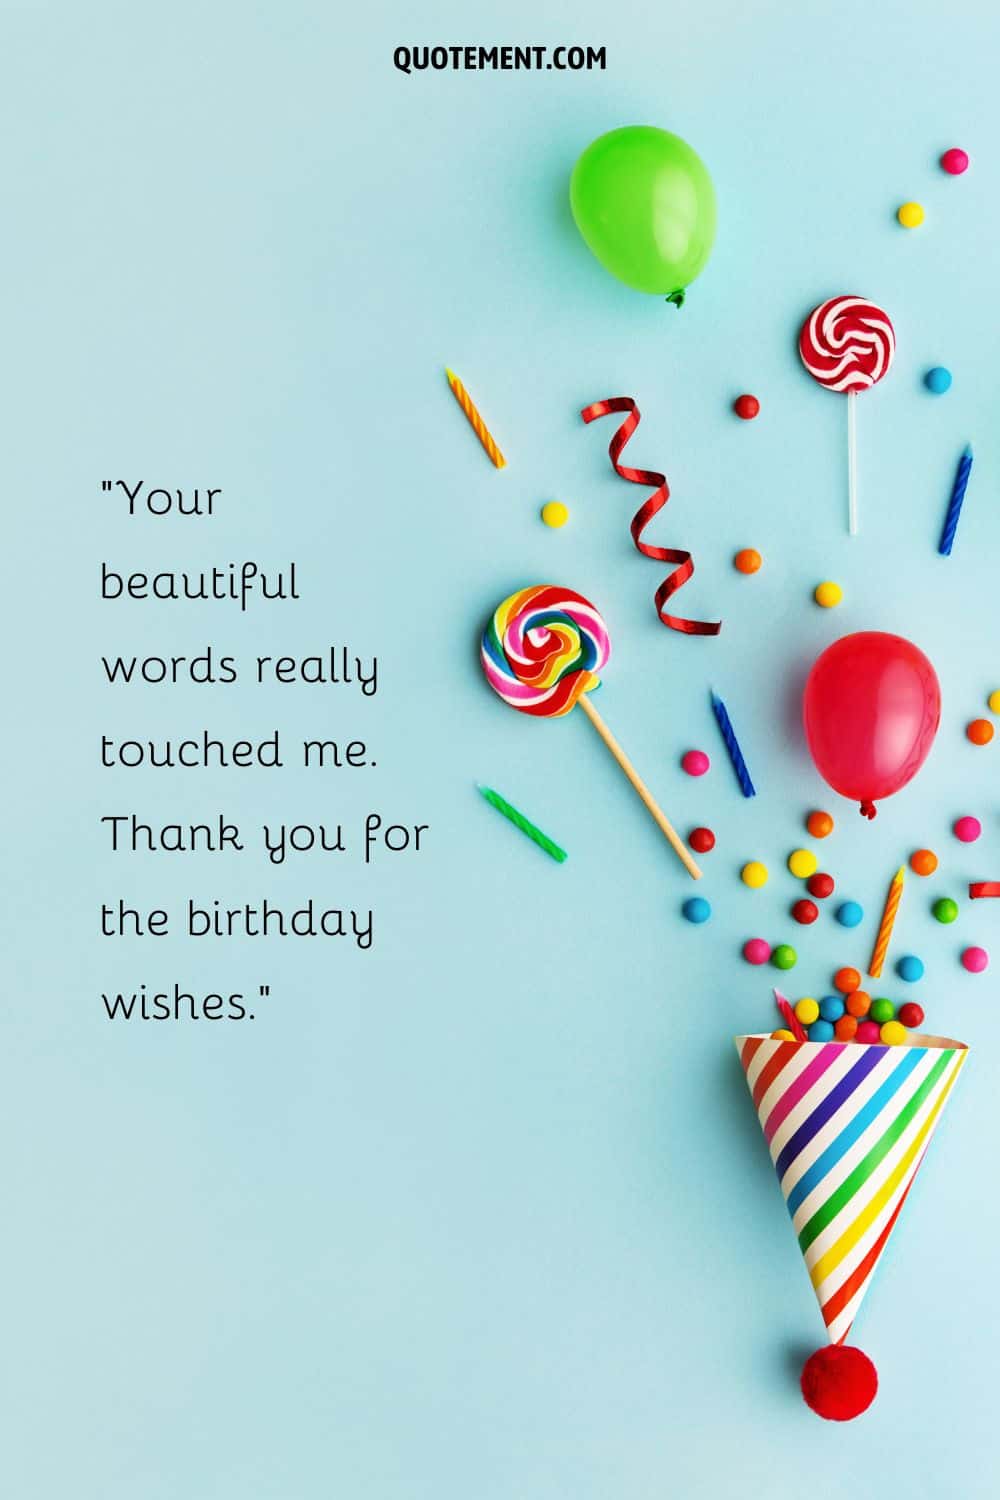 candies and balloons image representing short thank you for birthday message
